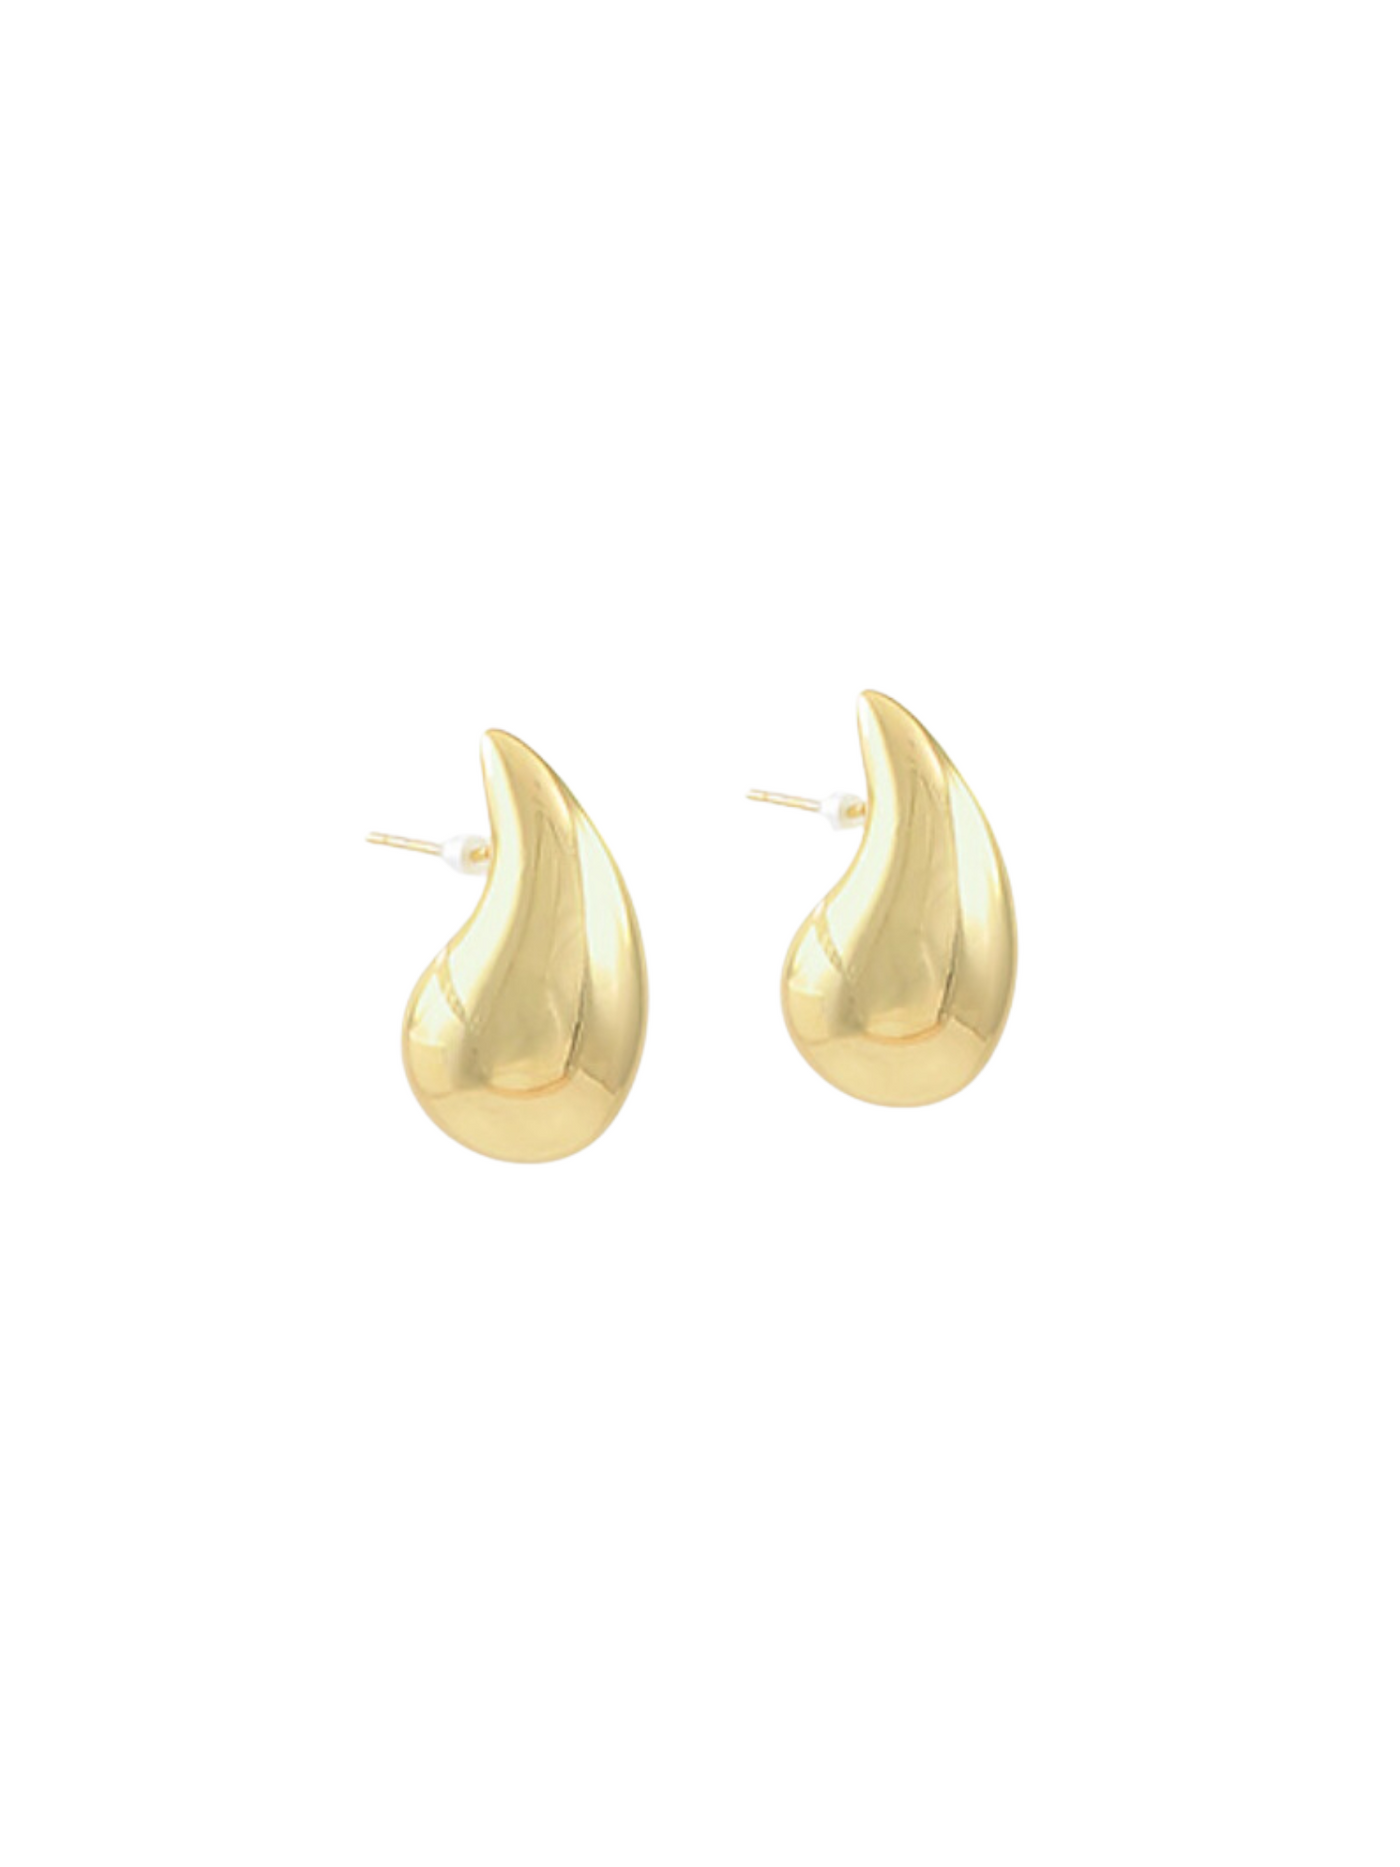 25mm Puffy Teardrop Earrings in polished gold on white background.